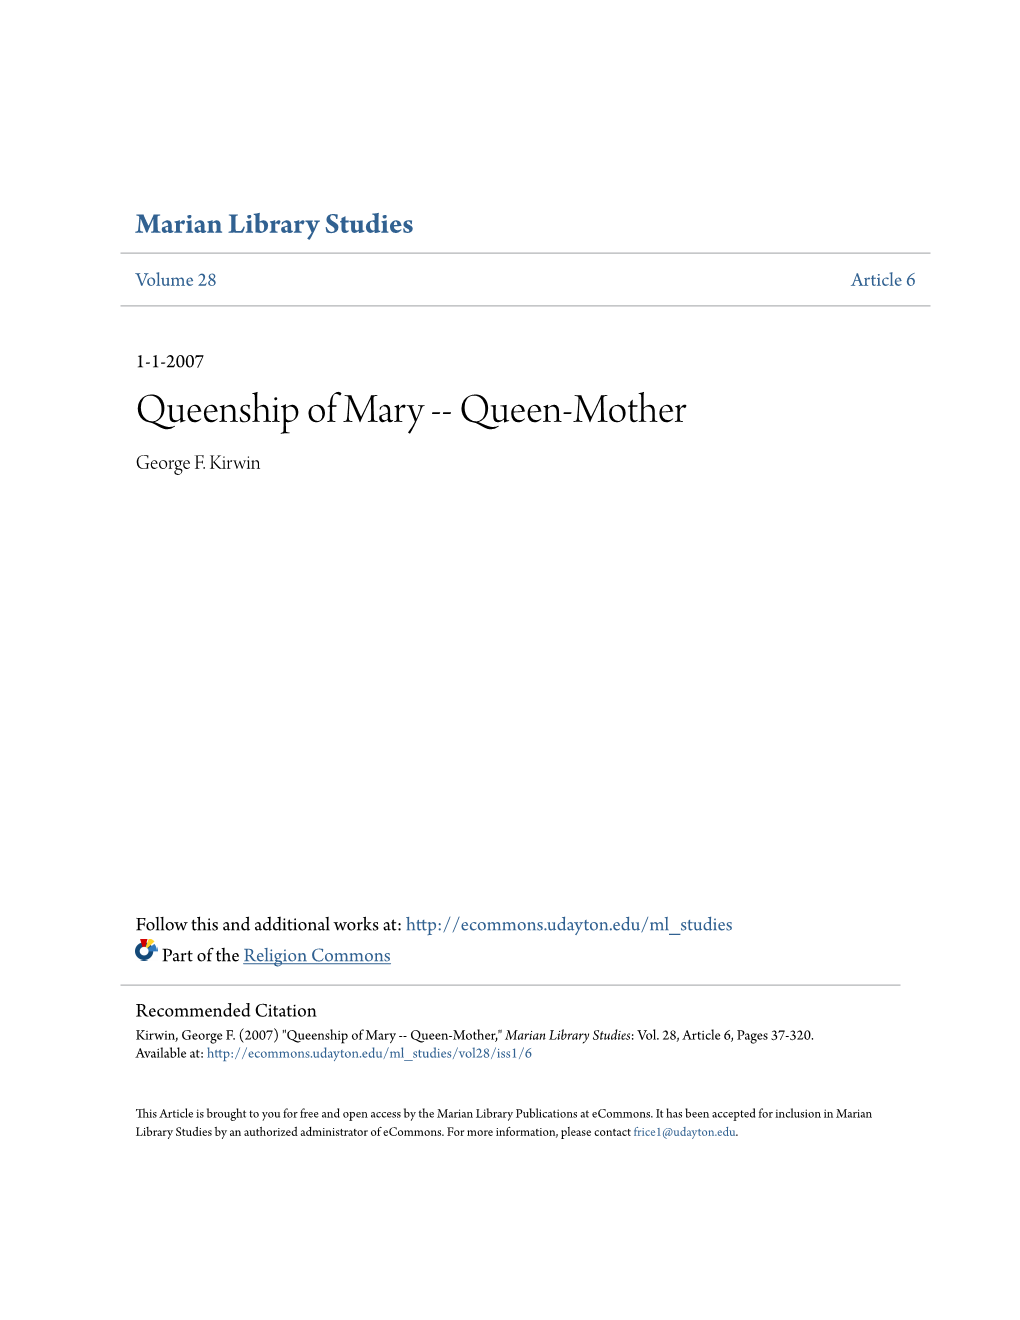 Queenship of Mary -- Queen-Mother George F